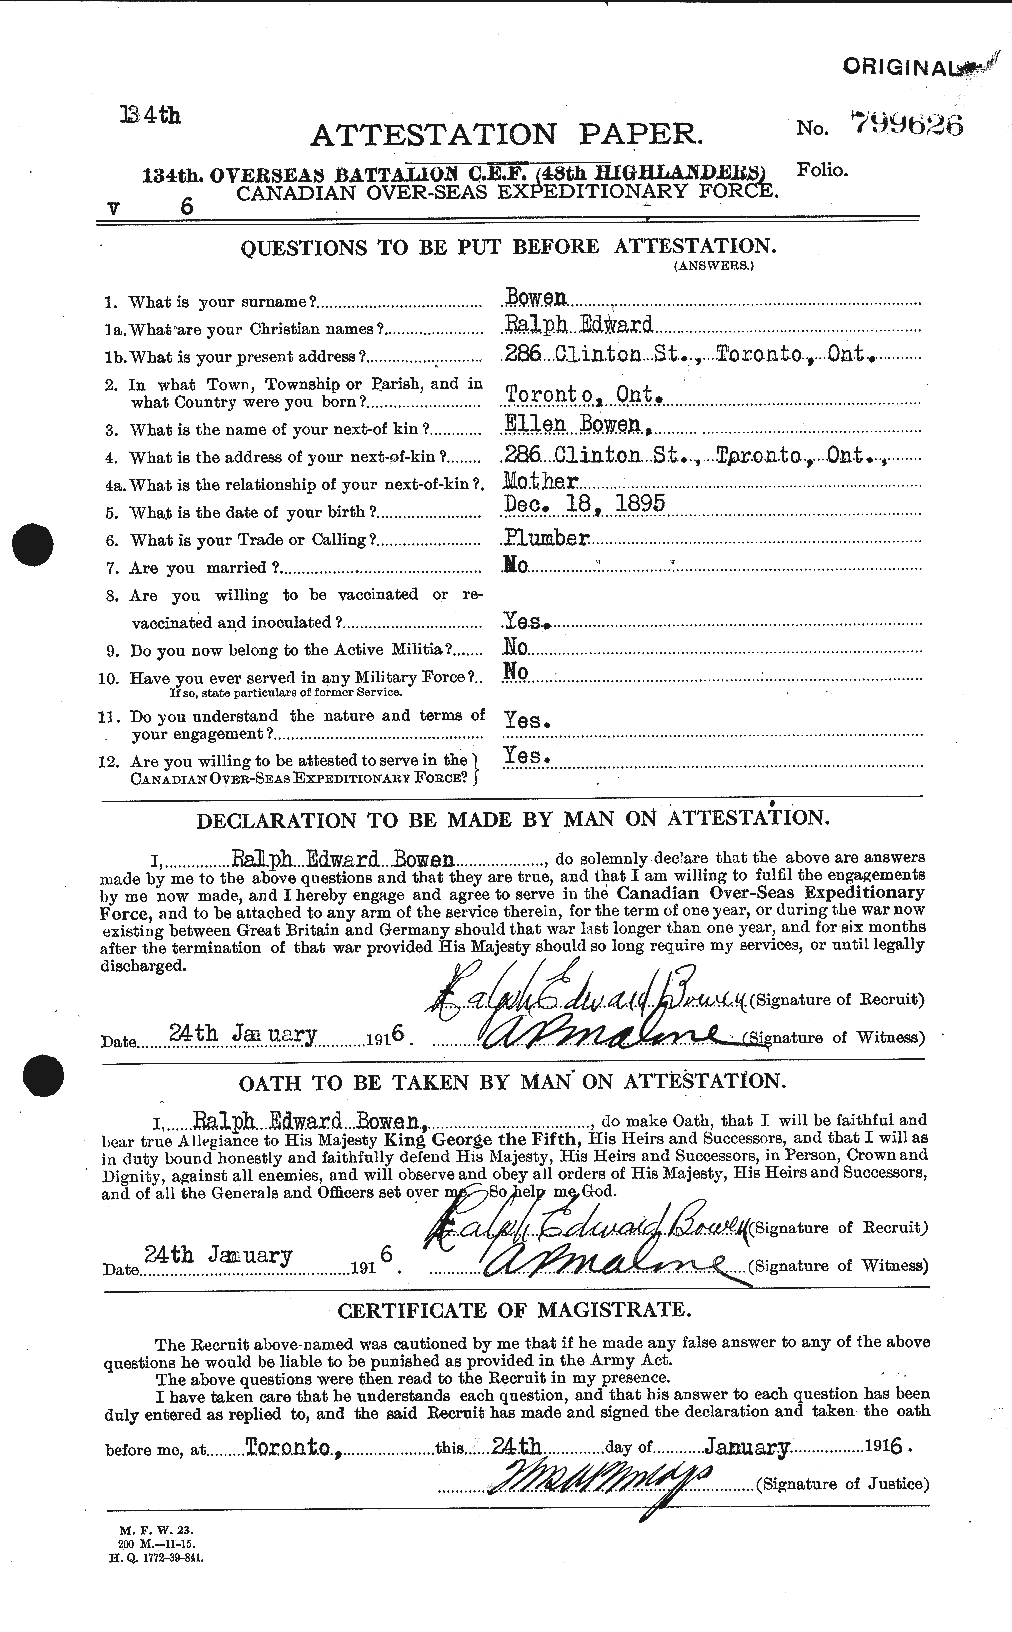 Personnel Records of the First World War - CEF 255457a